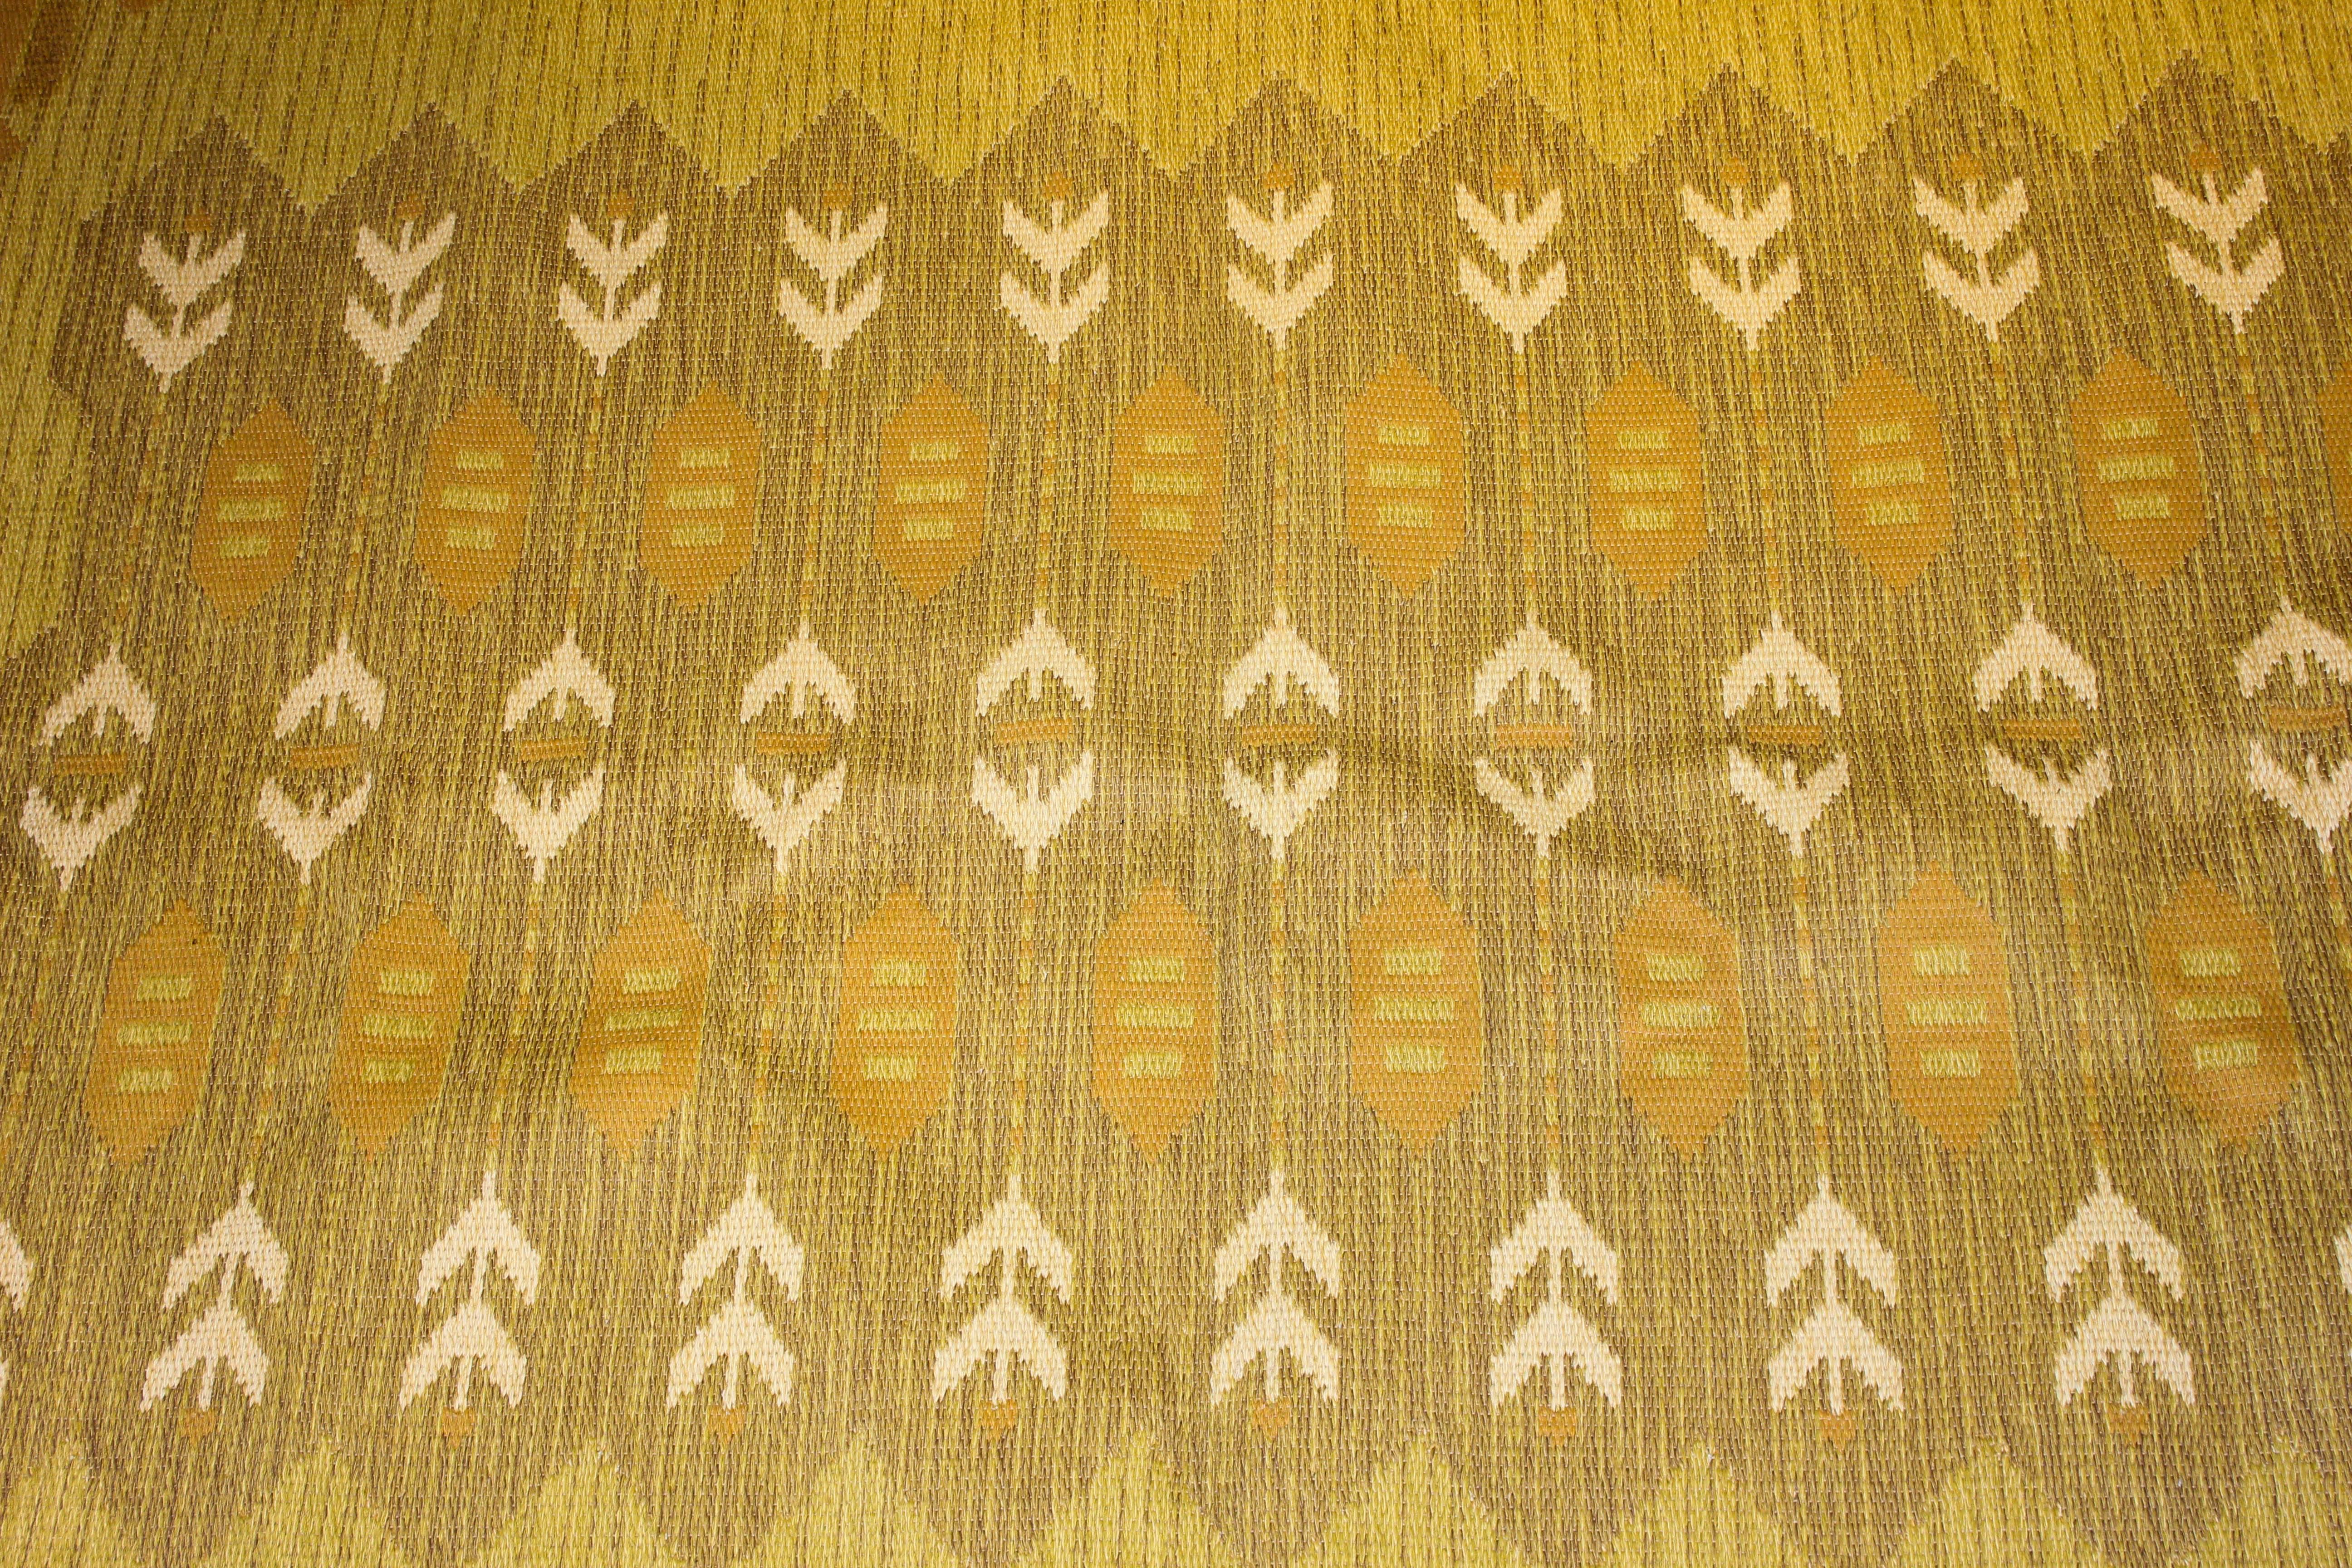 This carpet is a rare high-quality vintage flat-weave from Sweden signed JS. The carpet comes with nice colors and patterns. The fact that it is a double weave means that it can be used with either side up. The carpet is in very good vintage